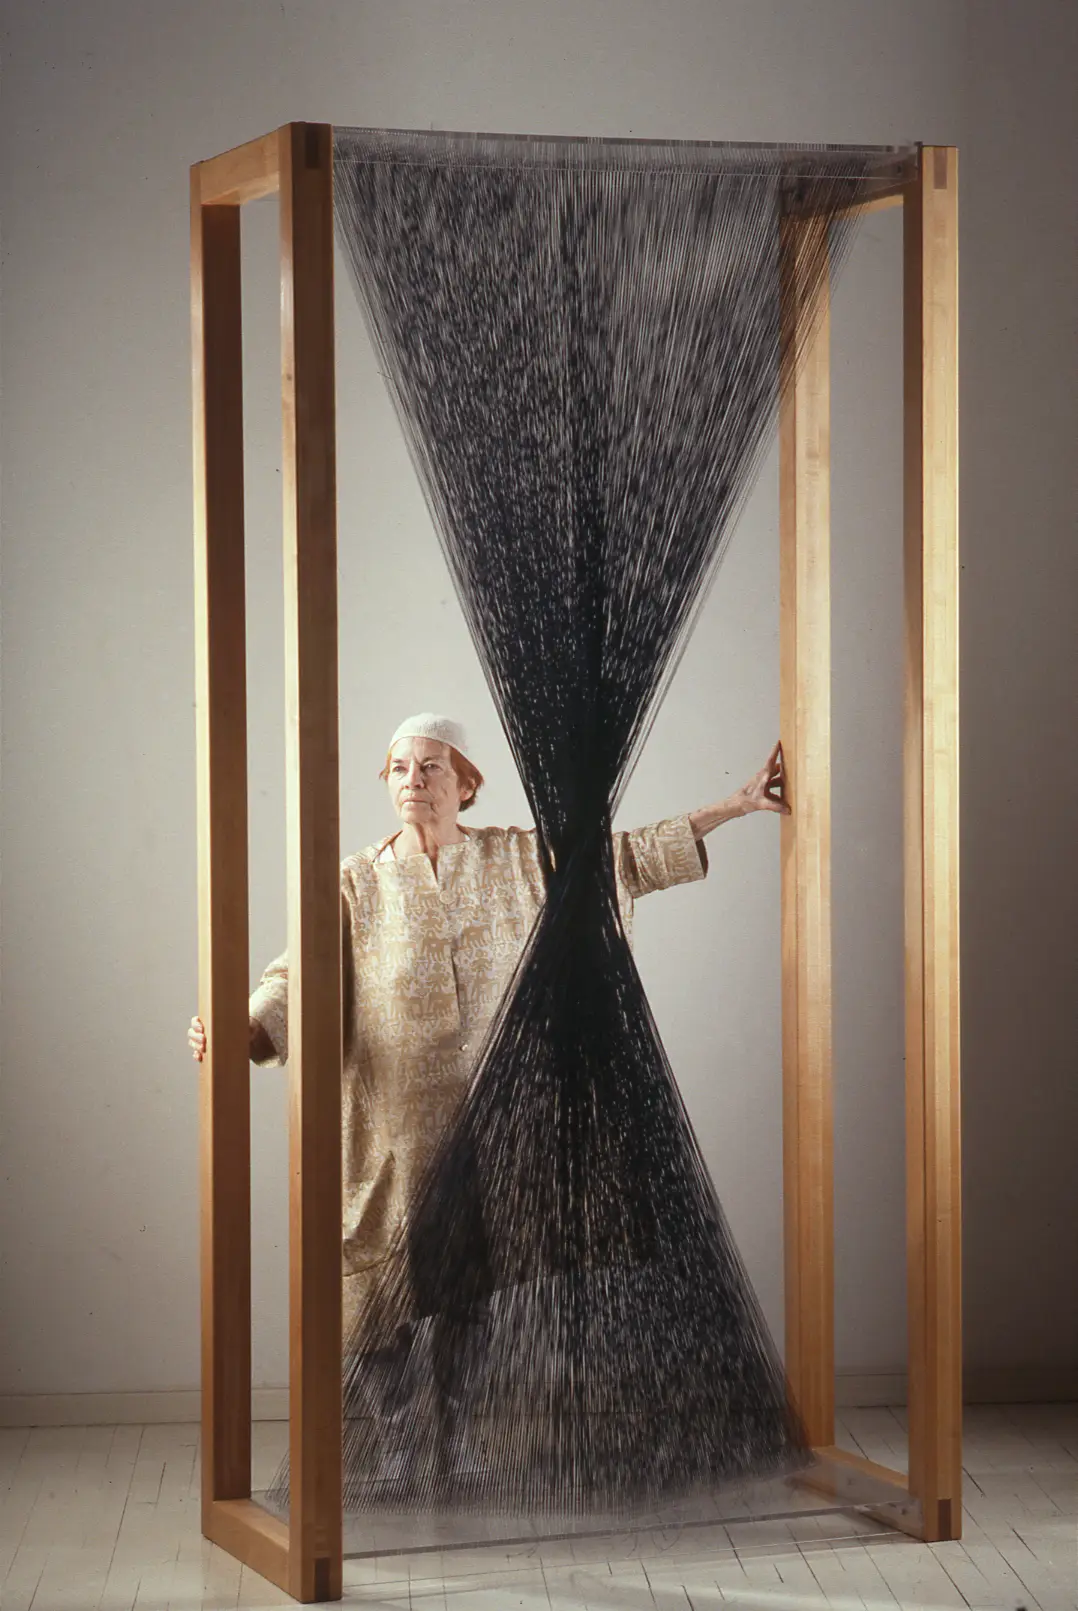 Lenore Tawney standing next to a large weave installation